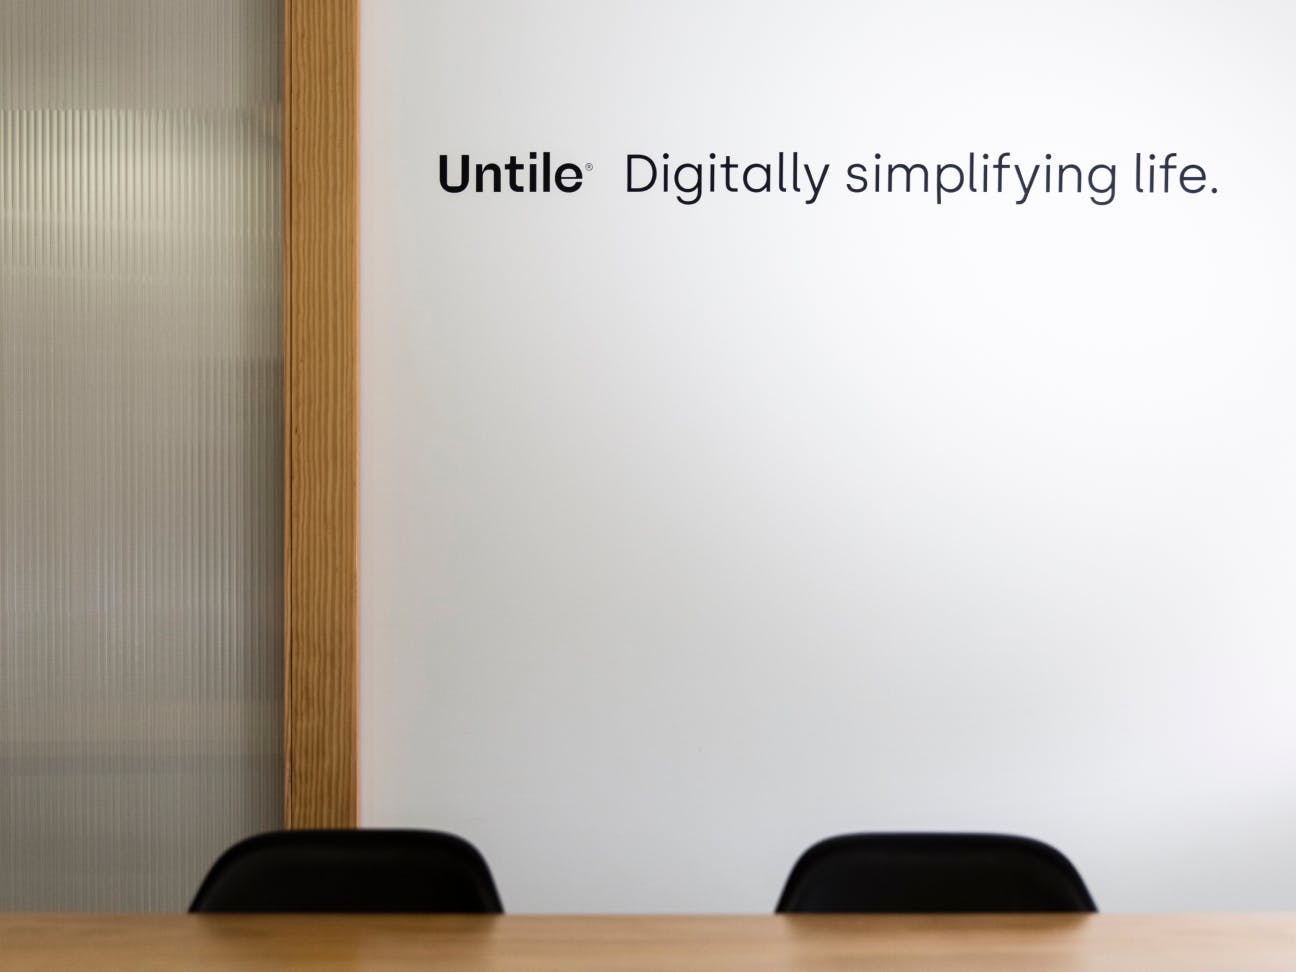 The Untile motto on the office wall